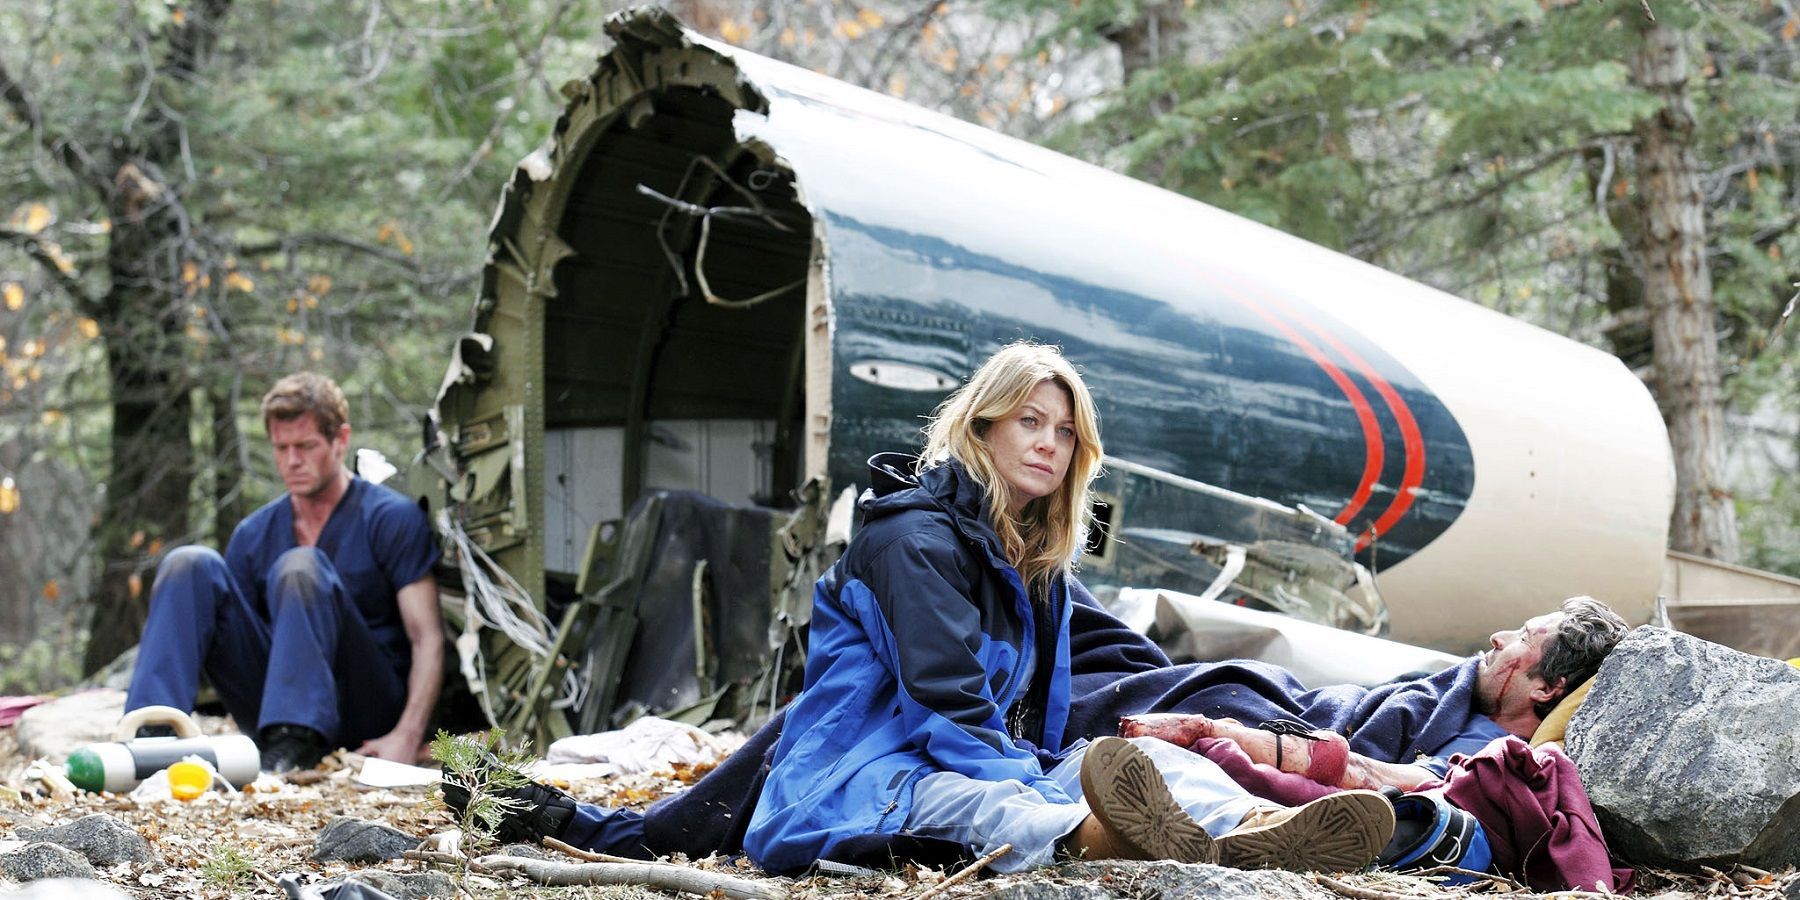 Eric Dane, Ellen Pompeo, and Patrick Dempsey as Mark, Meredith, and Derek in Grey's Anatomy after a plane crash.